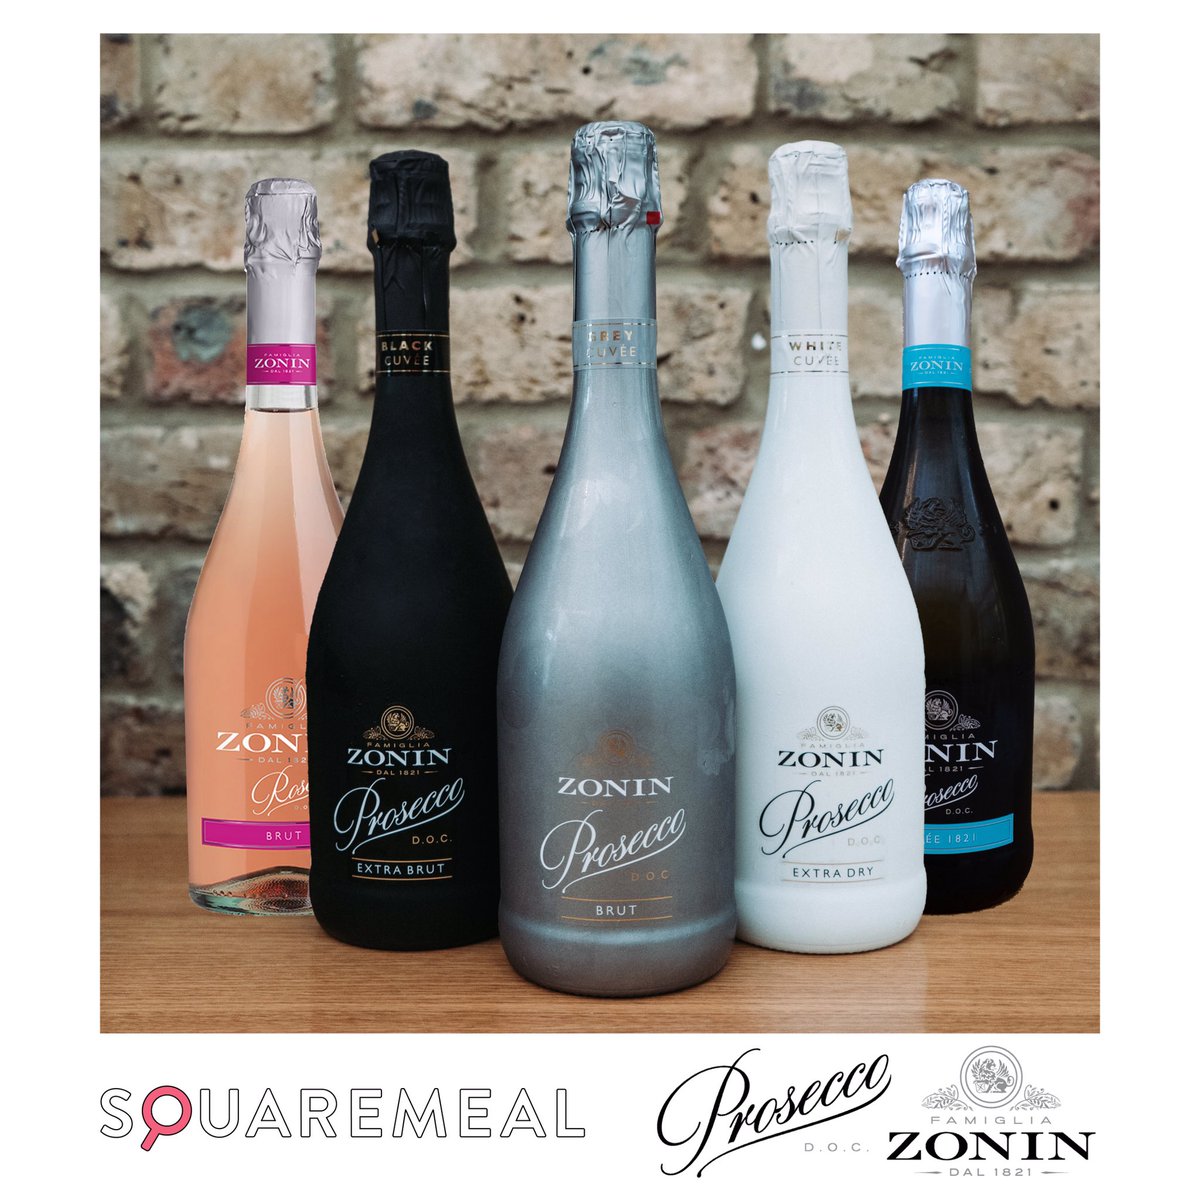 24hrs to go before to pop some bubbles together!🍾 @SquareMeal @ZoninProsecco #Sparkling #Prosecco #bubbles #event #London